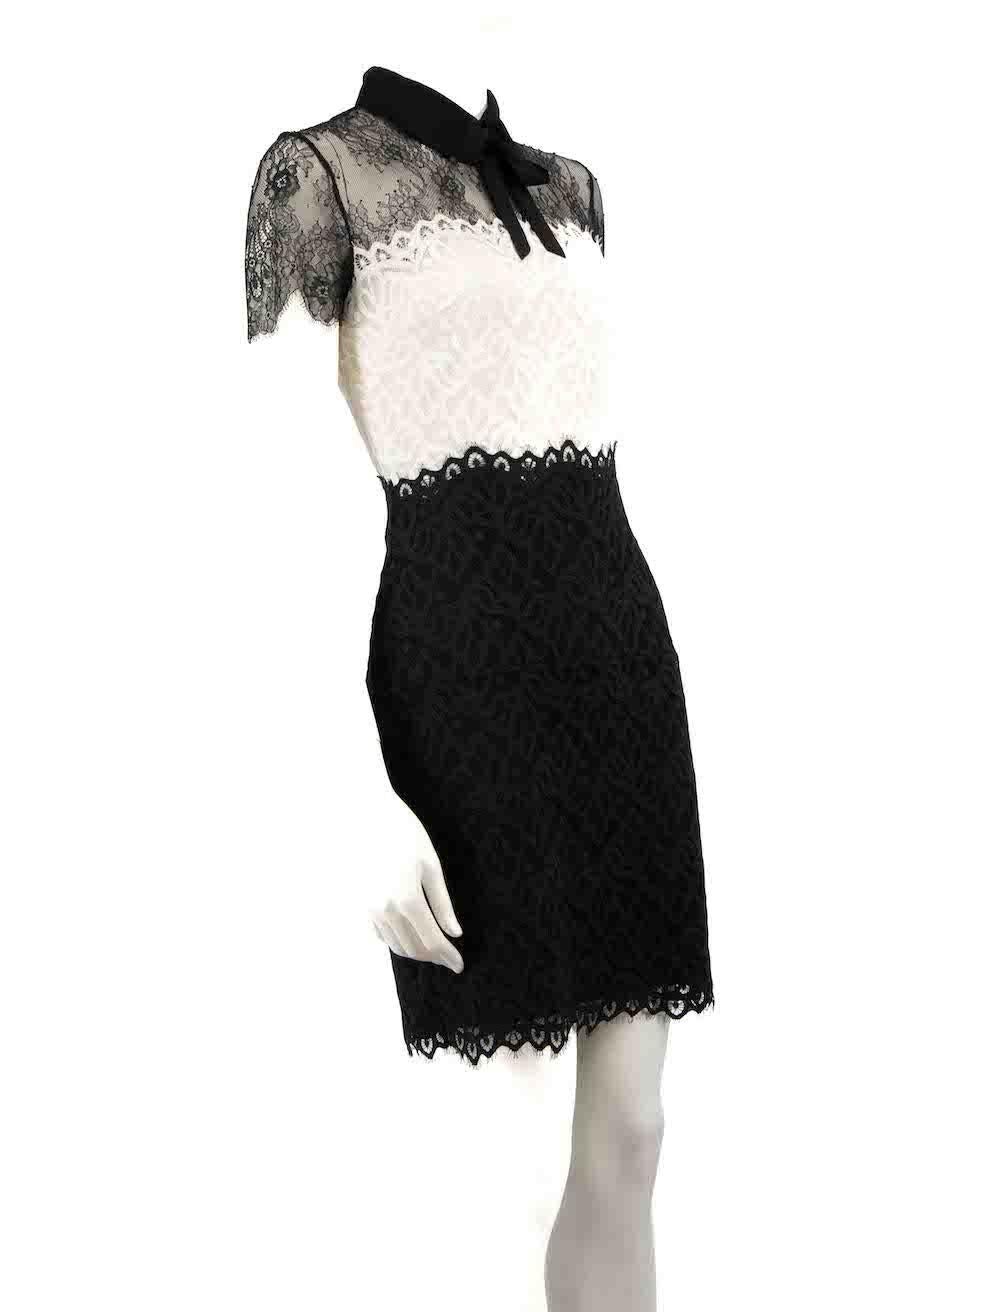 CONDITION is Very good. Minimal wear to dress is evident. Minimal wear to the front of the dress with a small mark near the centre on this used Sandro designer resale item.
 
 
 
 Details
 
 
 Black
 
 Lace
 
 Dress
 
 Mini
 
 Short sleeves
 
 Sheer